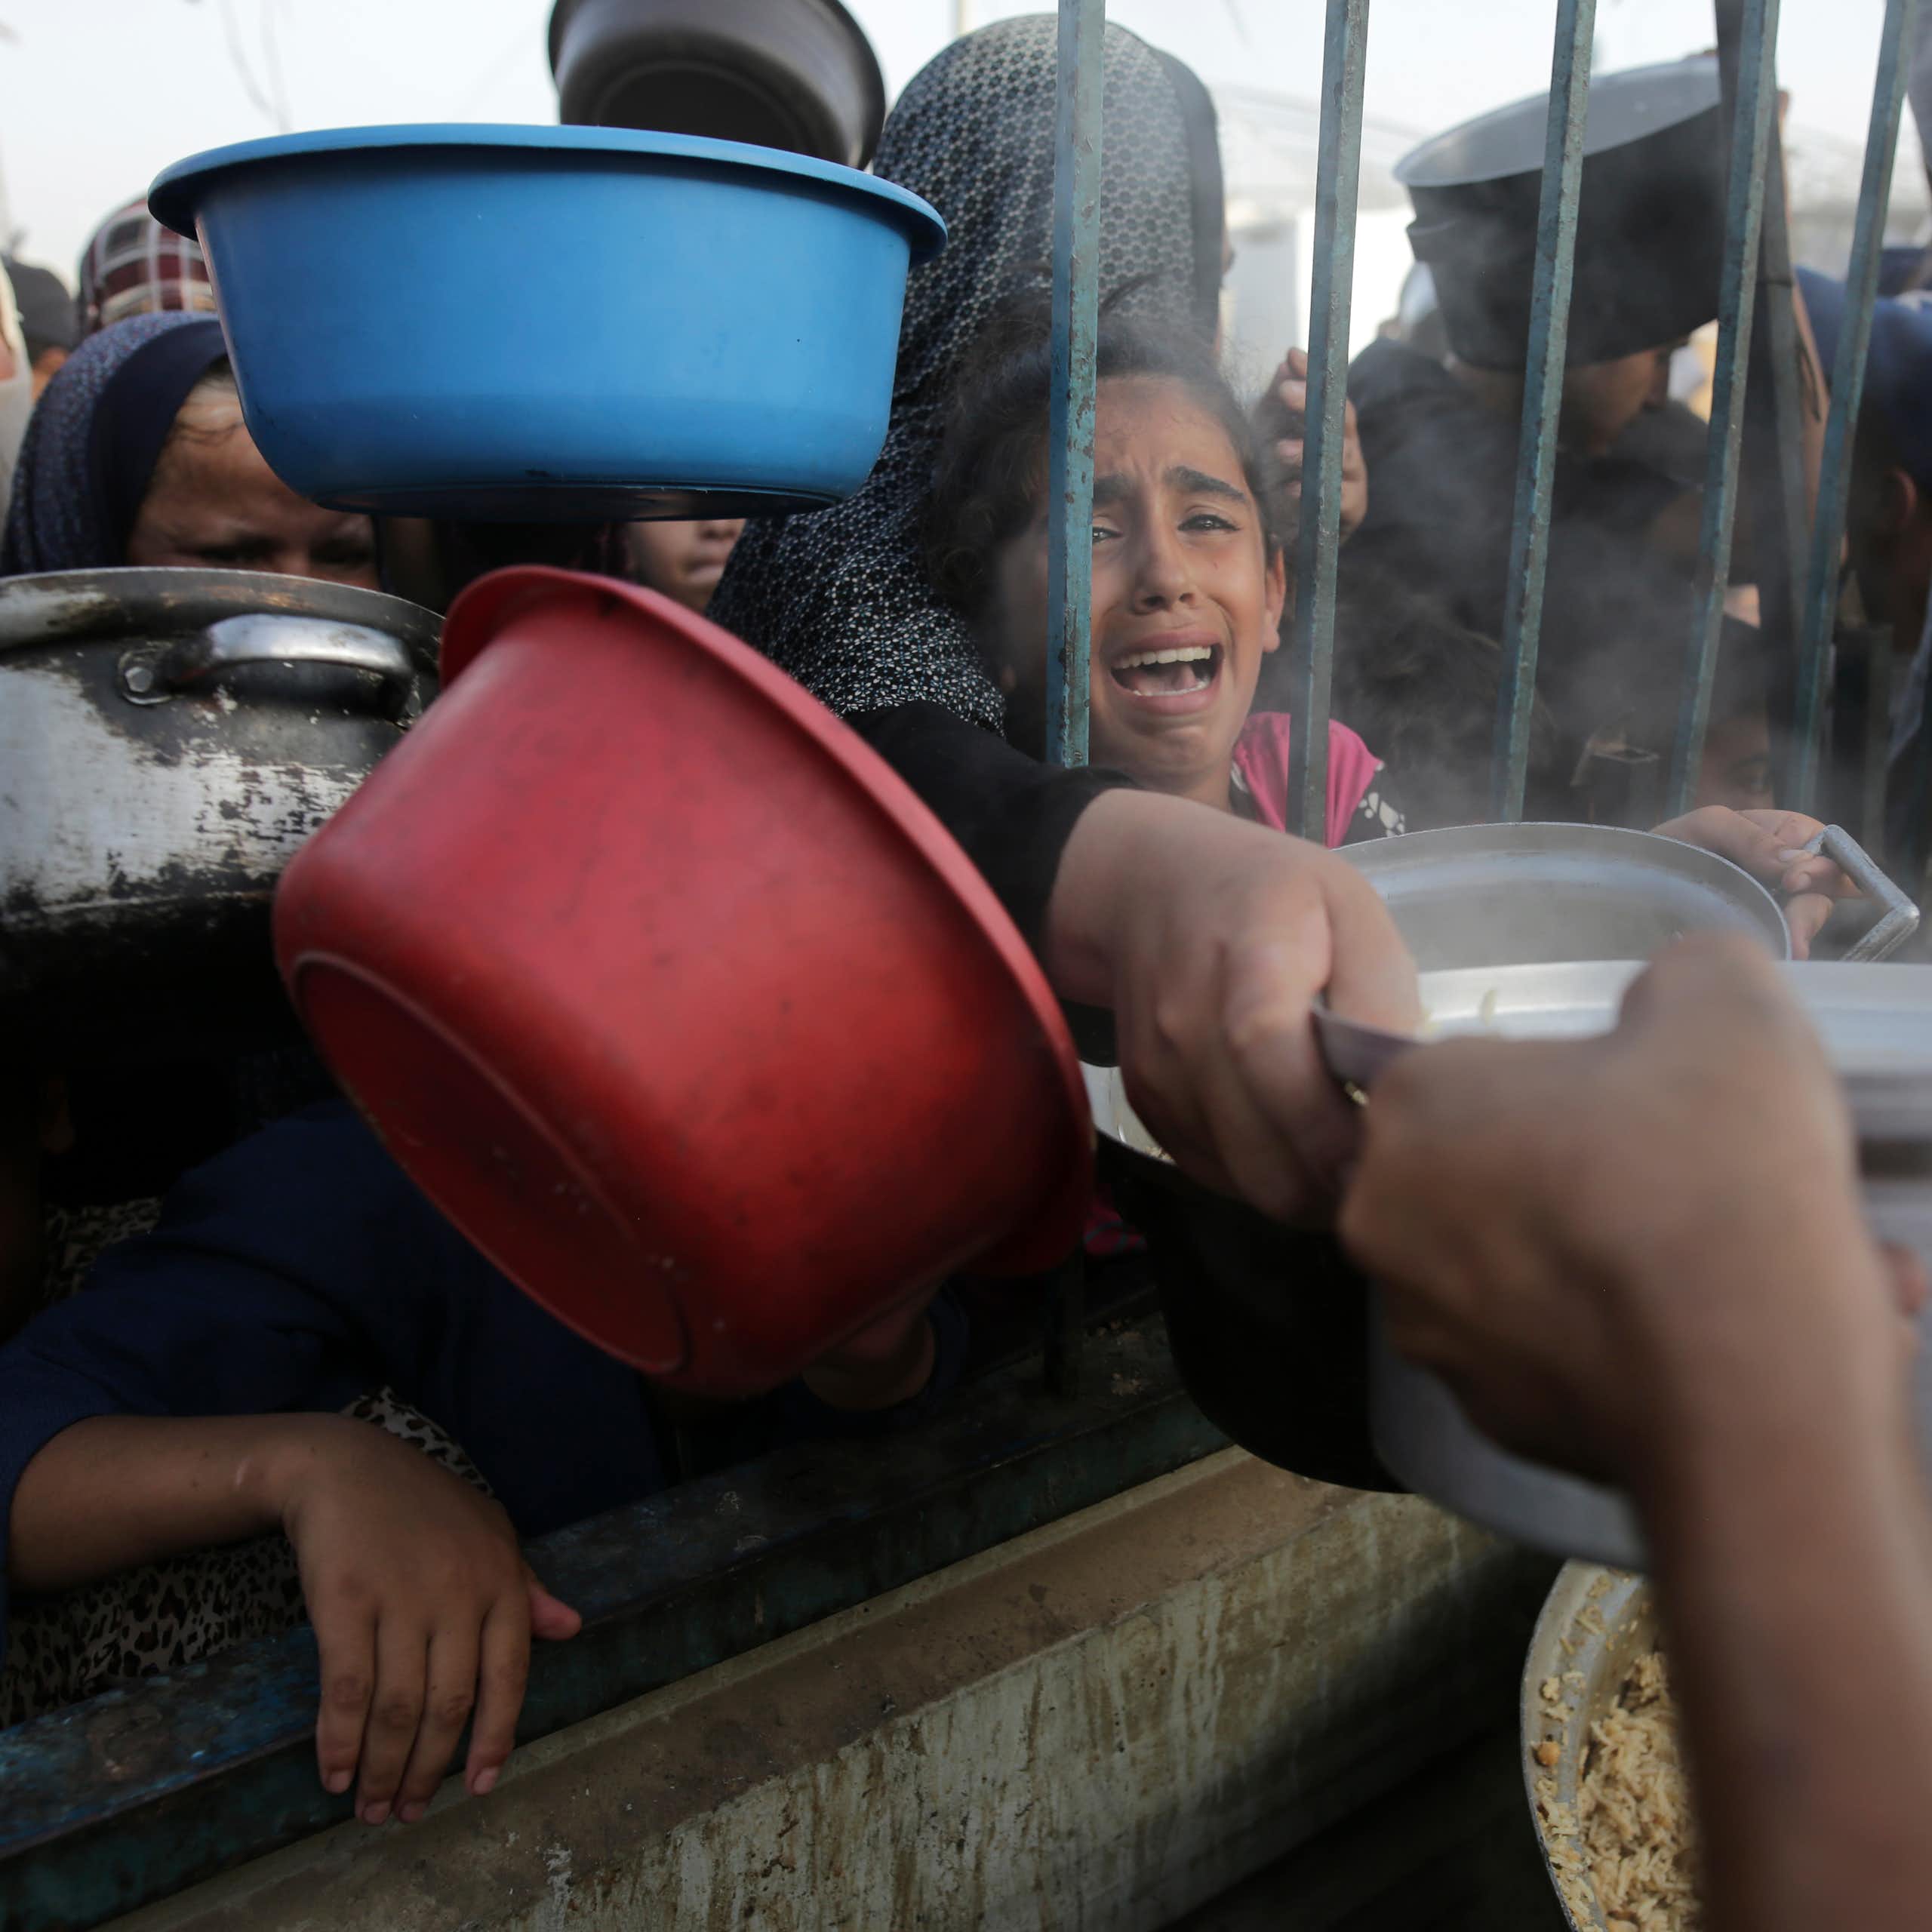 A young girl cries as she reaches through bars for food, as other people clamor around her with bowls.